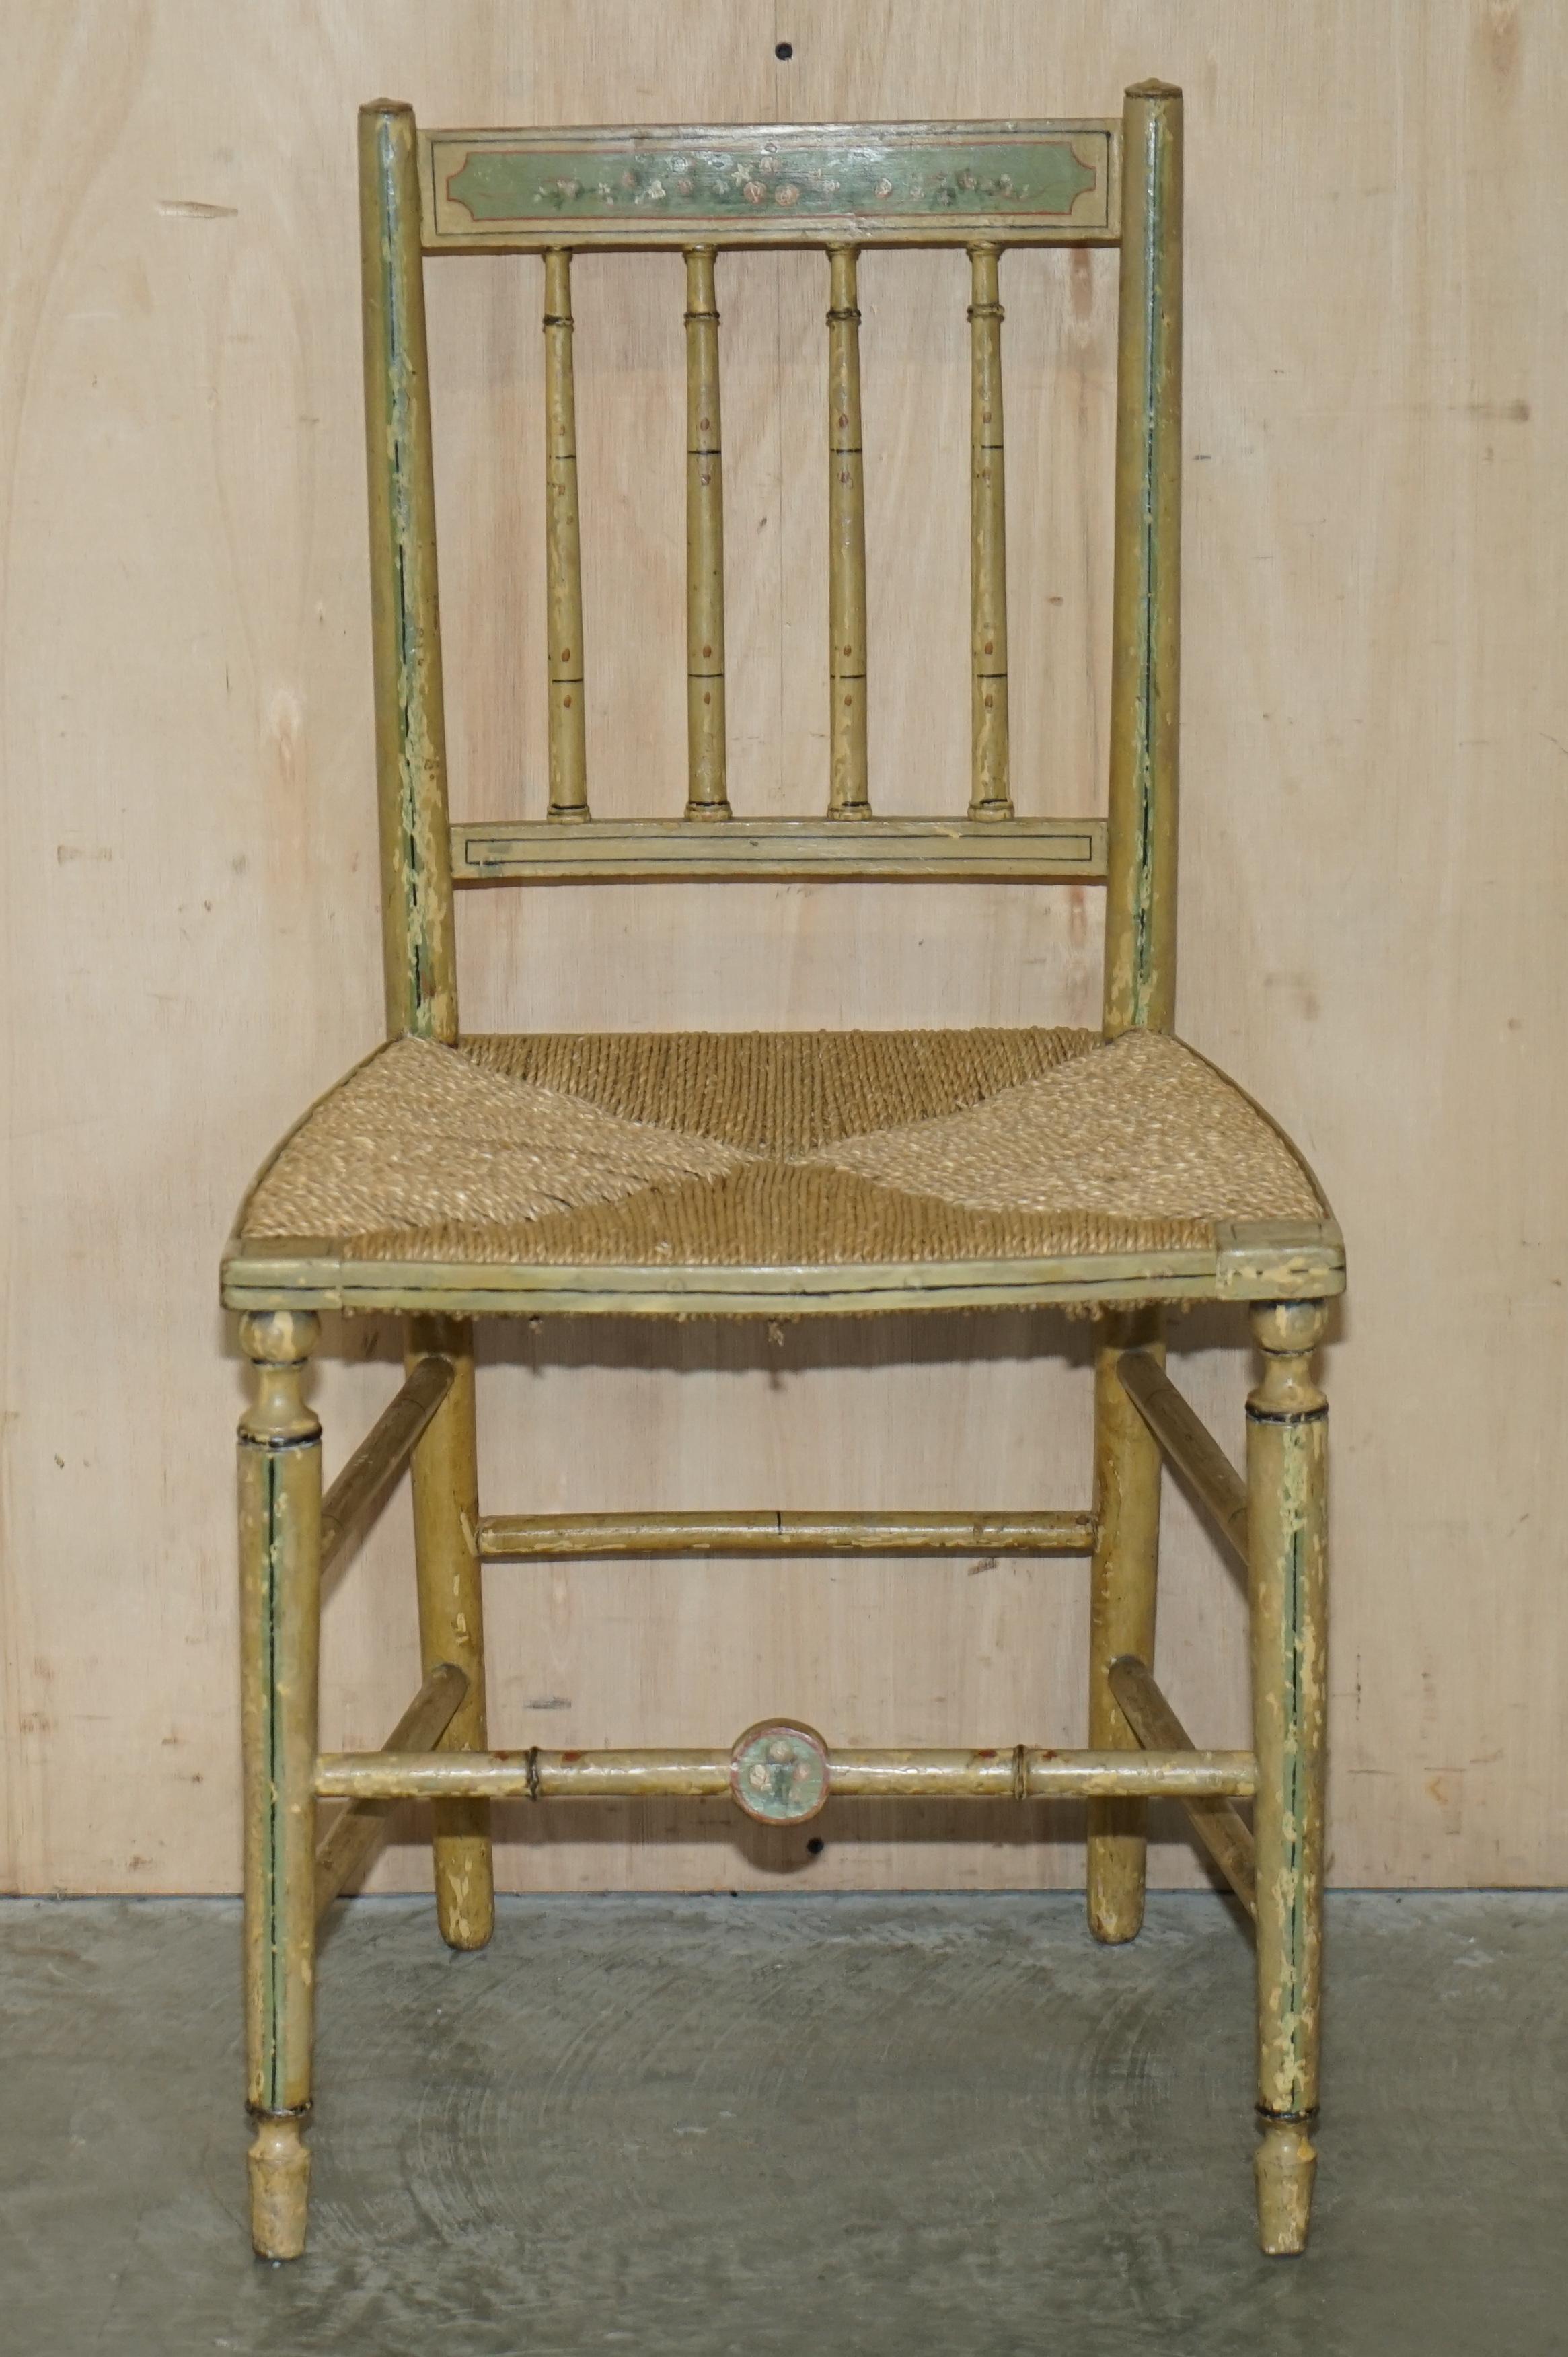 We are is delighted to offer for sale this lovely original circa 1810-1820 Regency hand painted side chair with period woven seat

A very good looking well made and decorative chair. This piece has all the original paint and looks SUBLIME from